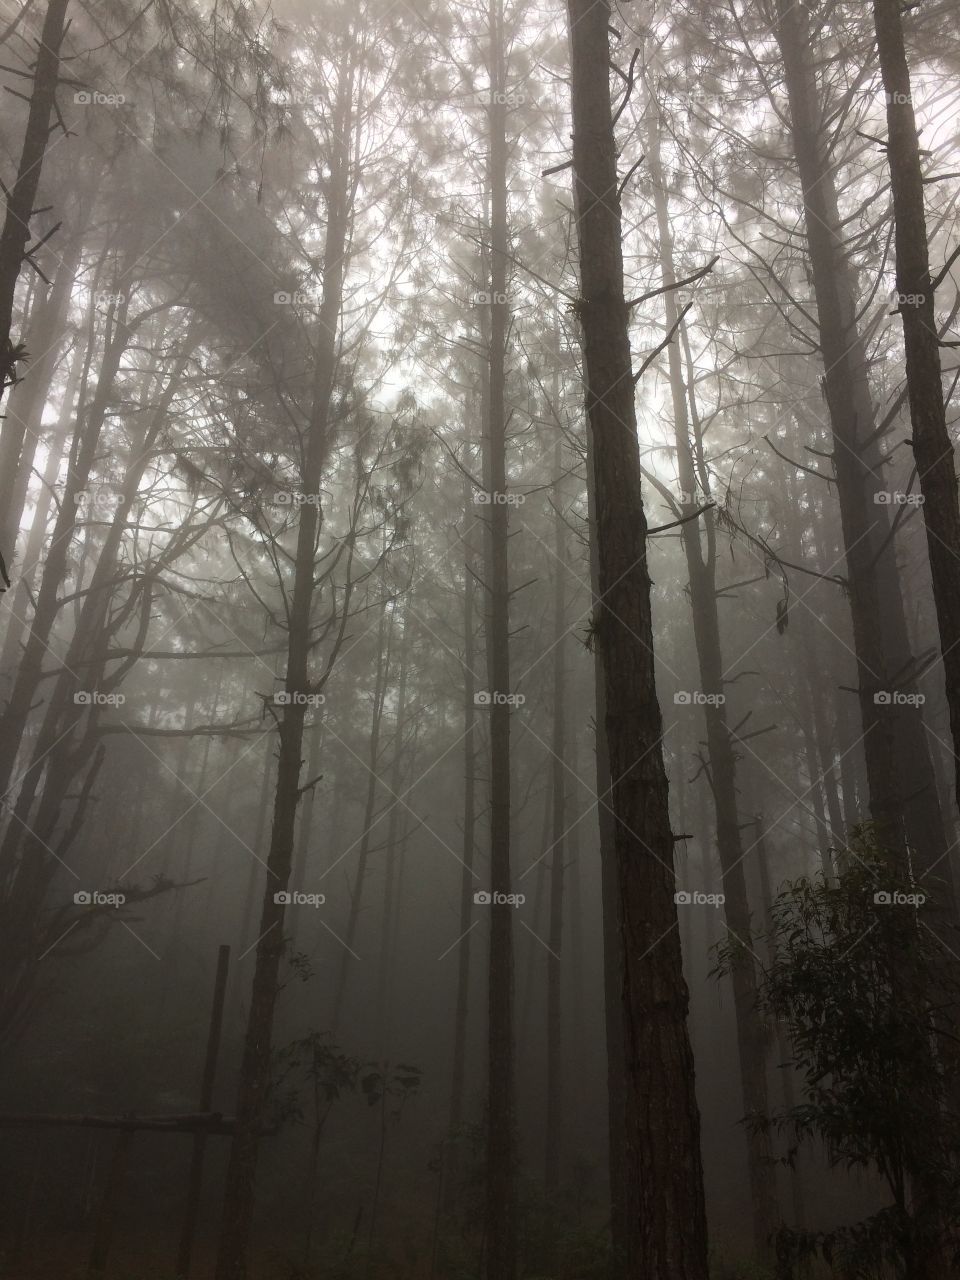 Fog in the forest 